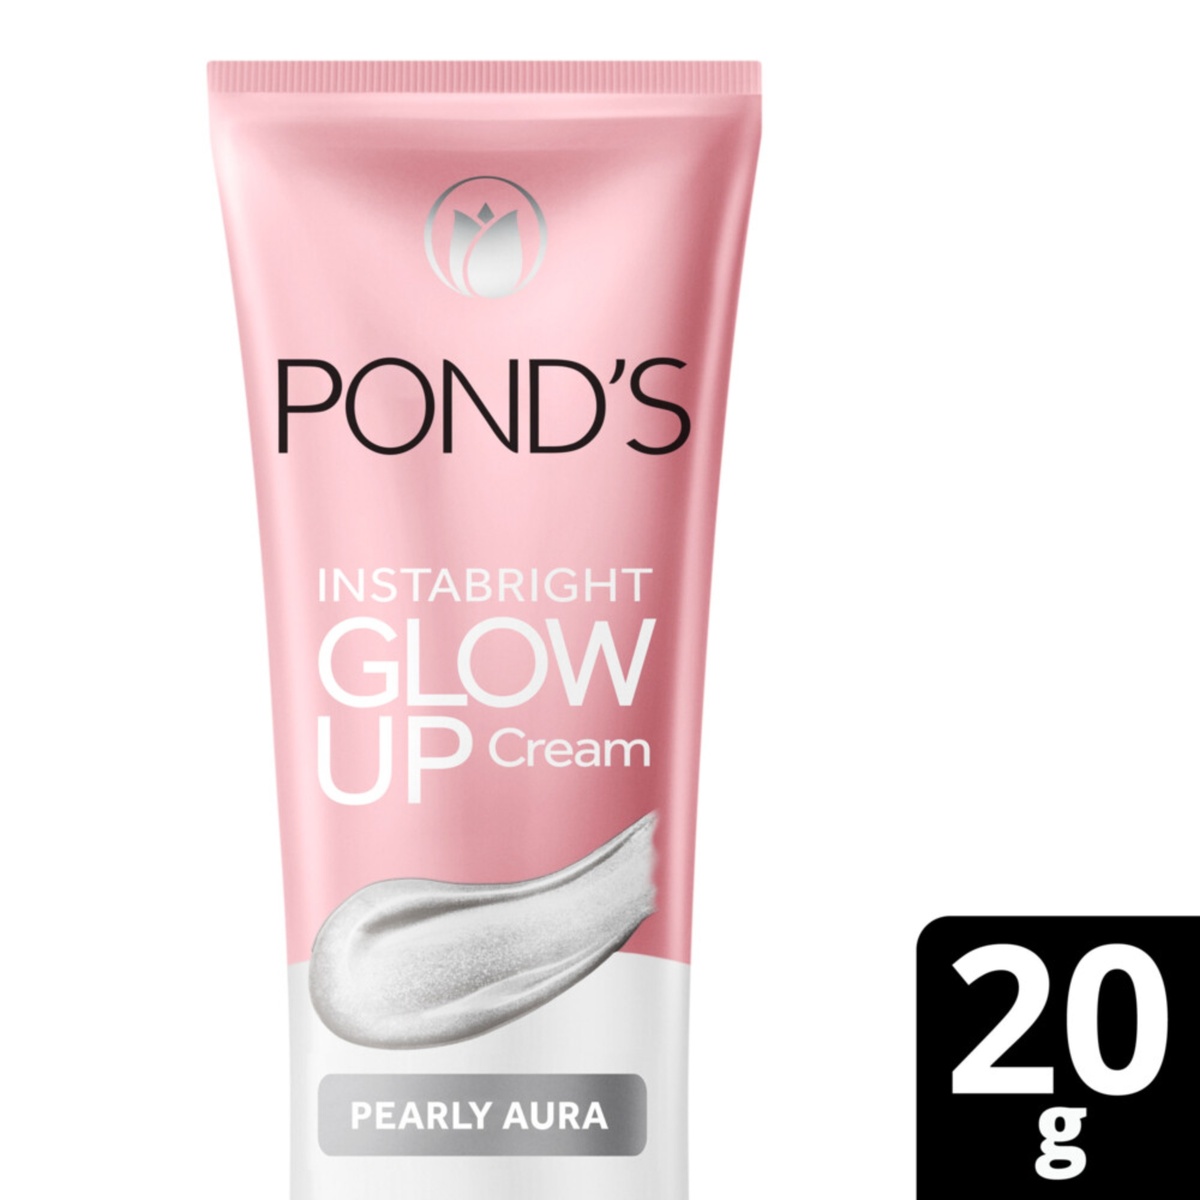 Ponds Instabright Pearly Aura Glow Up Cream 20g